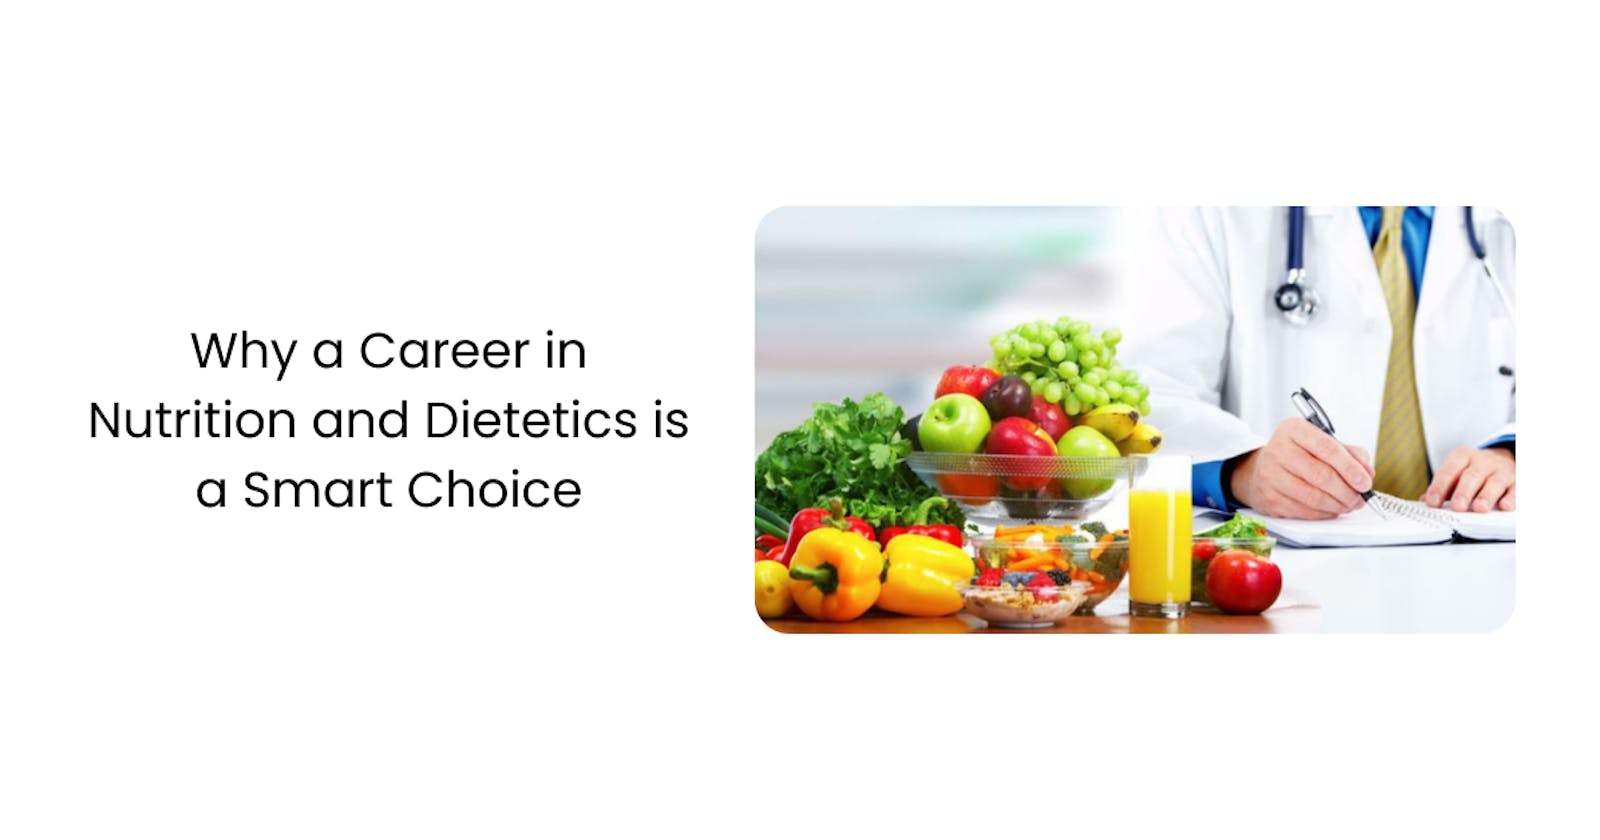 Why a Career in Nutrition and Dietetics is a Smart Choice